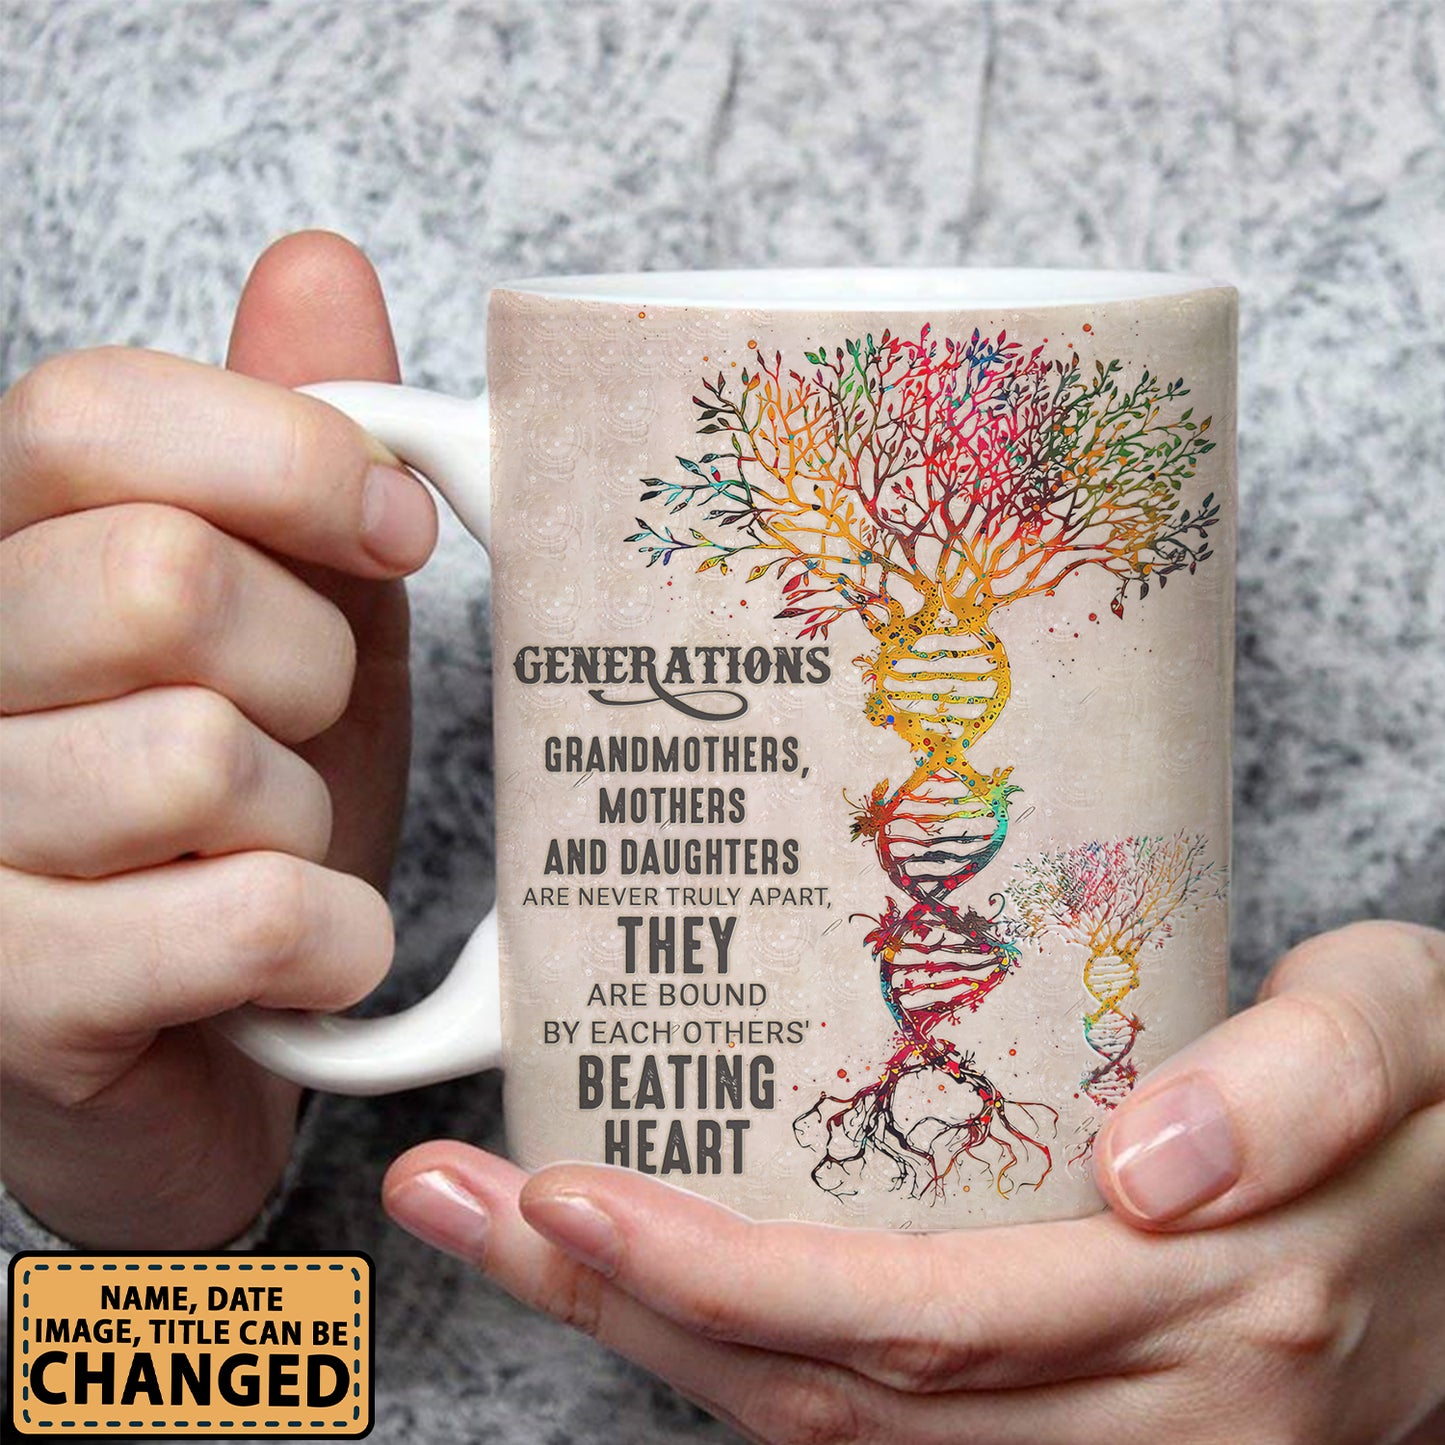 Personalized Generations Grandmothers, Mothers And Daughters Are Never Truly Apart New Grandma Gifts Custom Grandkids Photo, Names Personalizedwitch